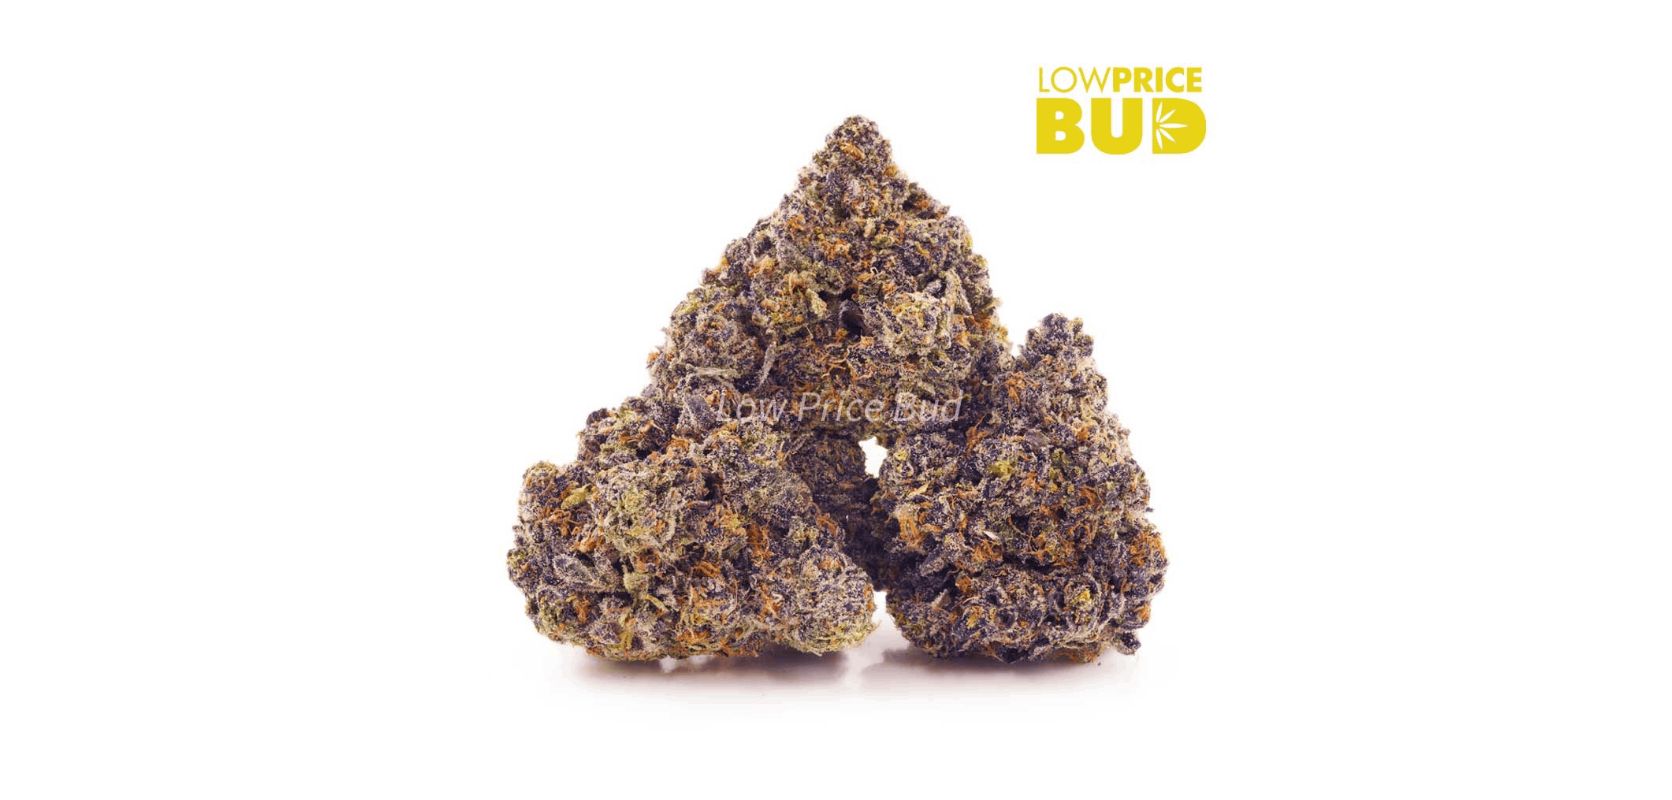 Are you looking for a great all-round cannabis experience? This AAAA-grade Crazy Glue strain from LowPriceBud may be just what you need.